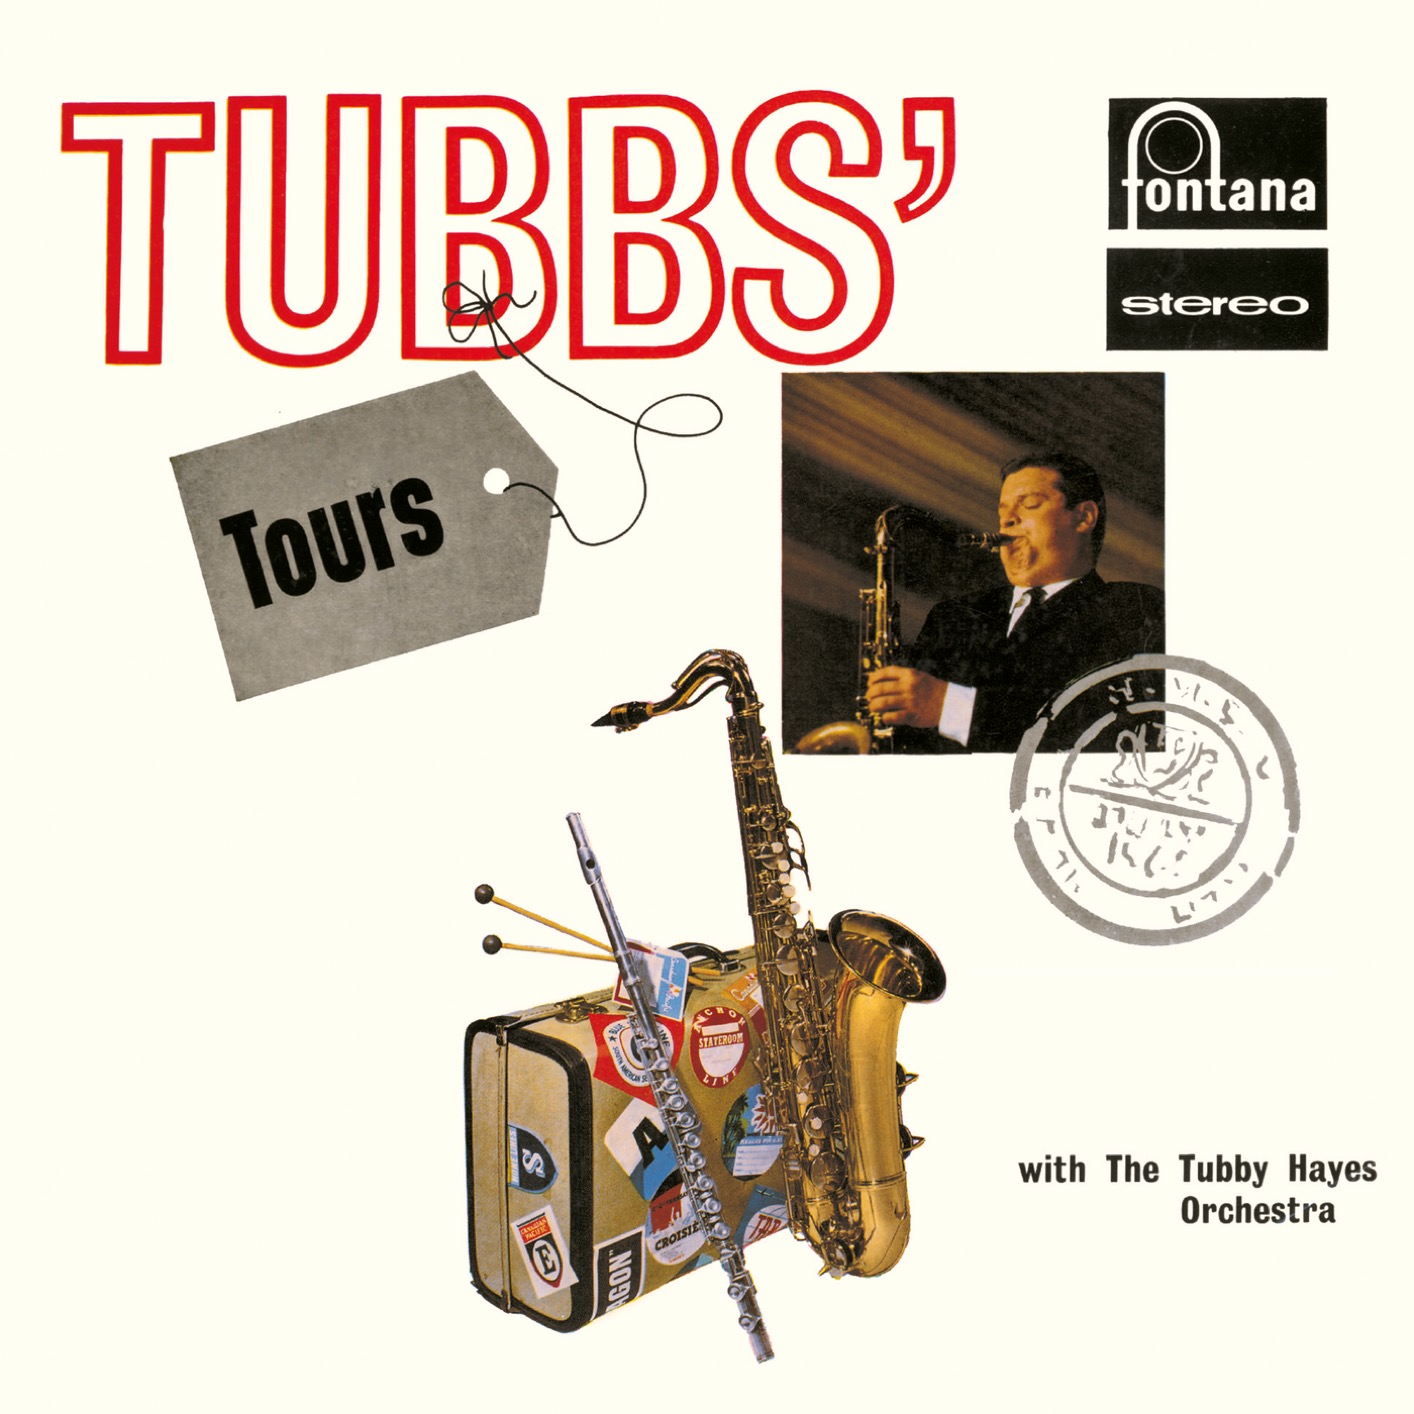 The Tubby Hayes Orchestra - Tubbs’ Tours (Remastered) (1963/2019) [FLAC 24bit/88,2kHz]